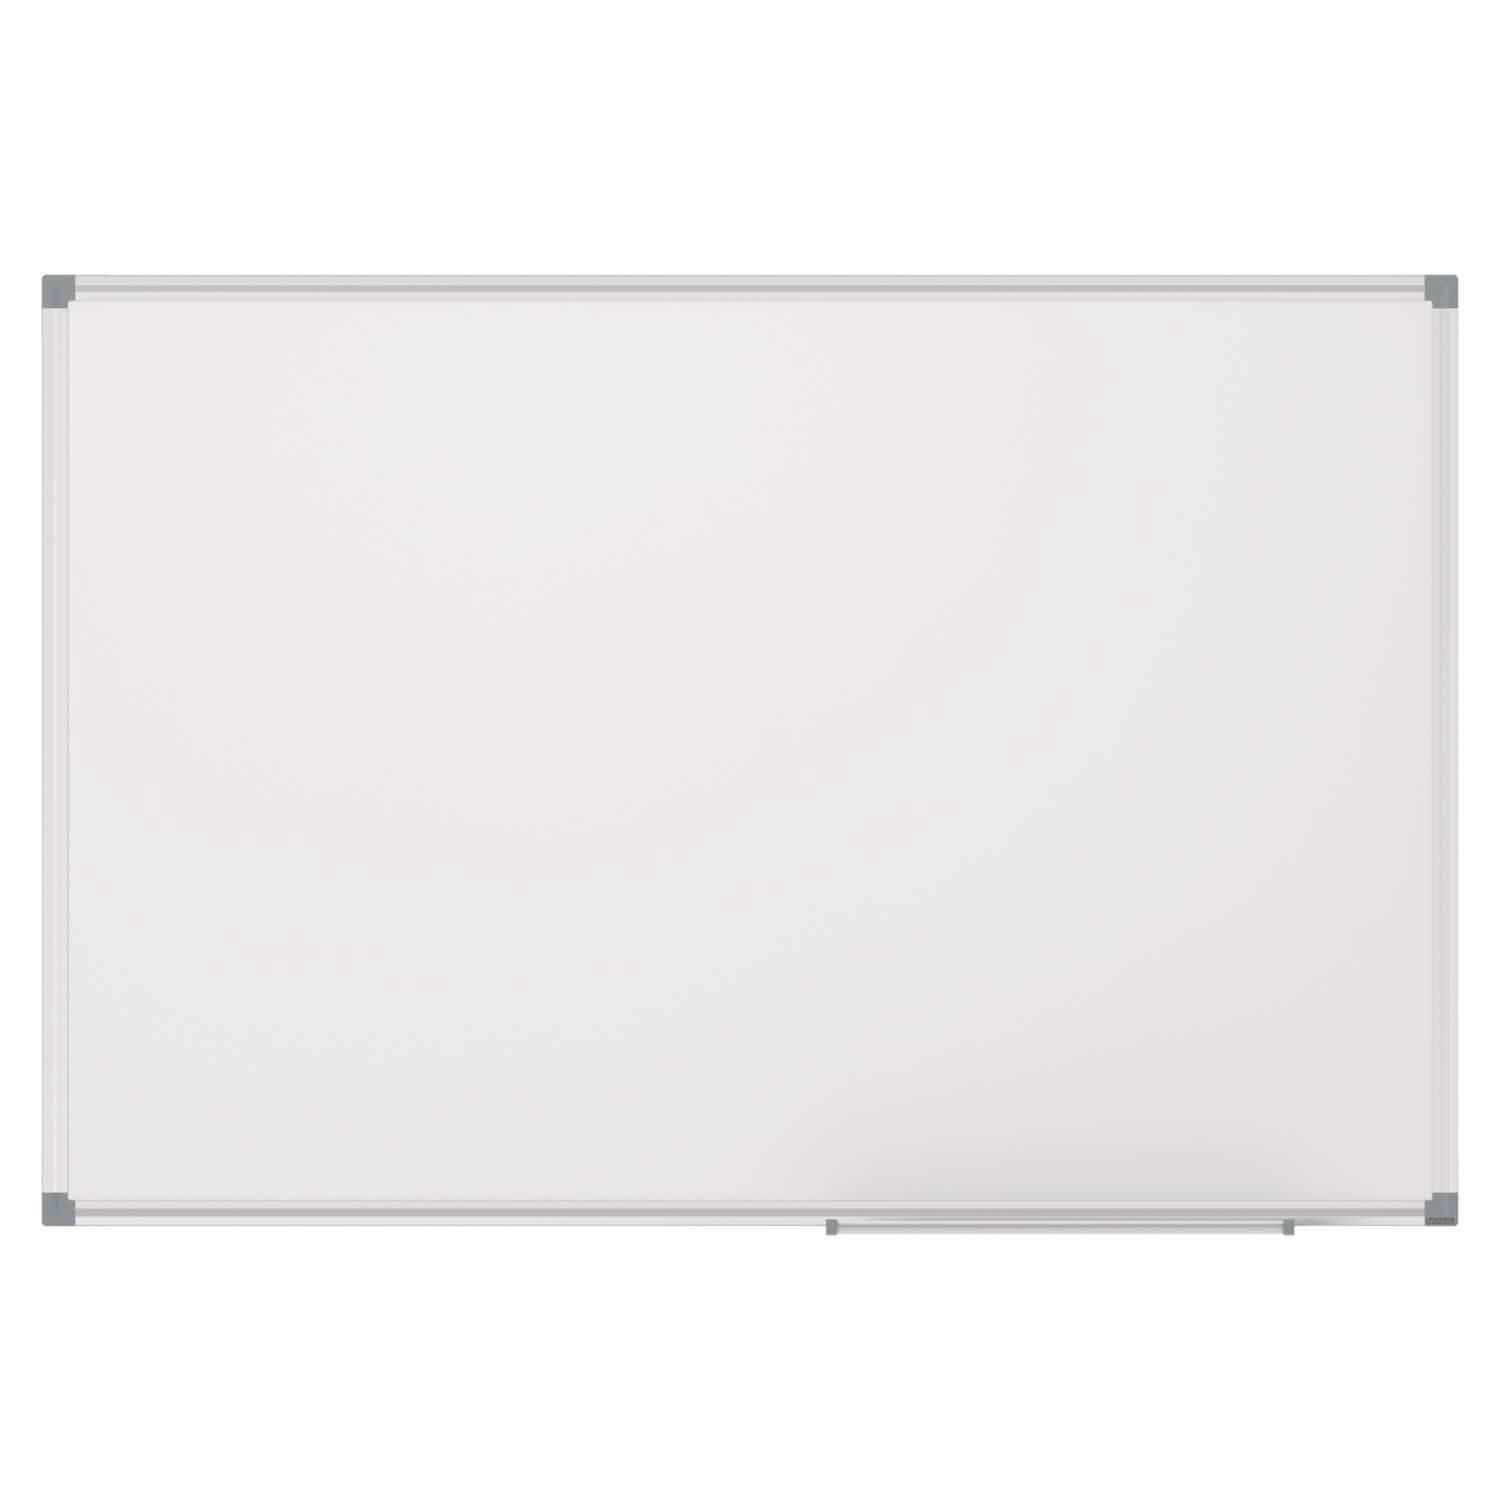 Whiteboard MAULstandard, Emaille, 90x120 cm